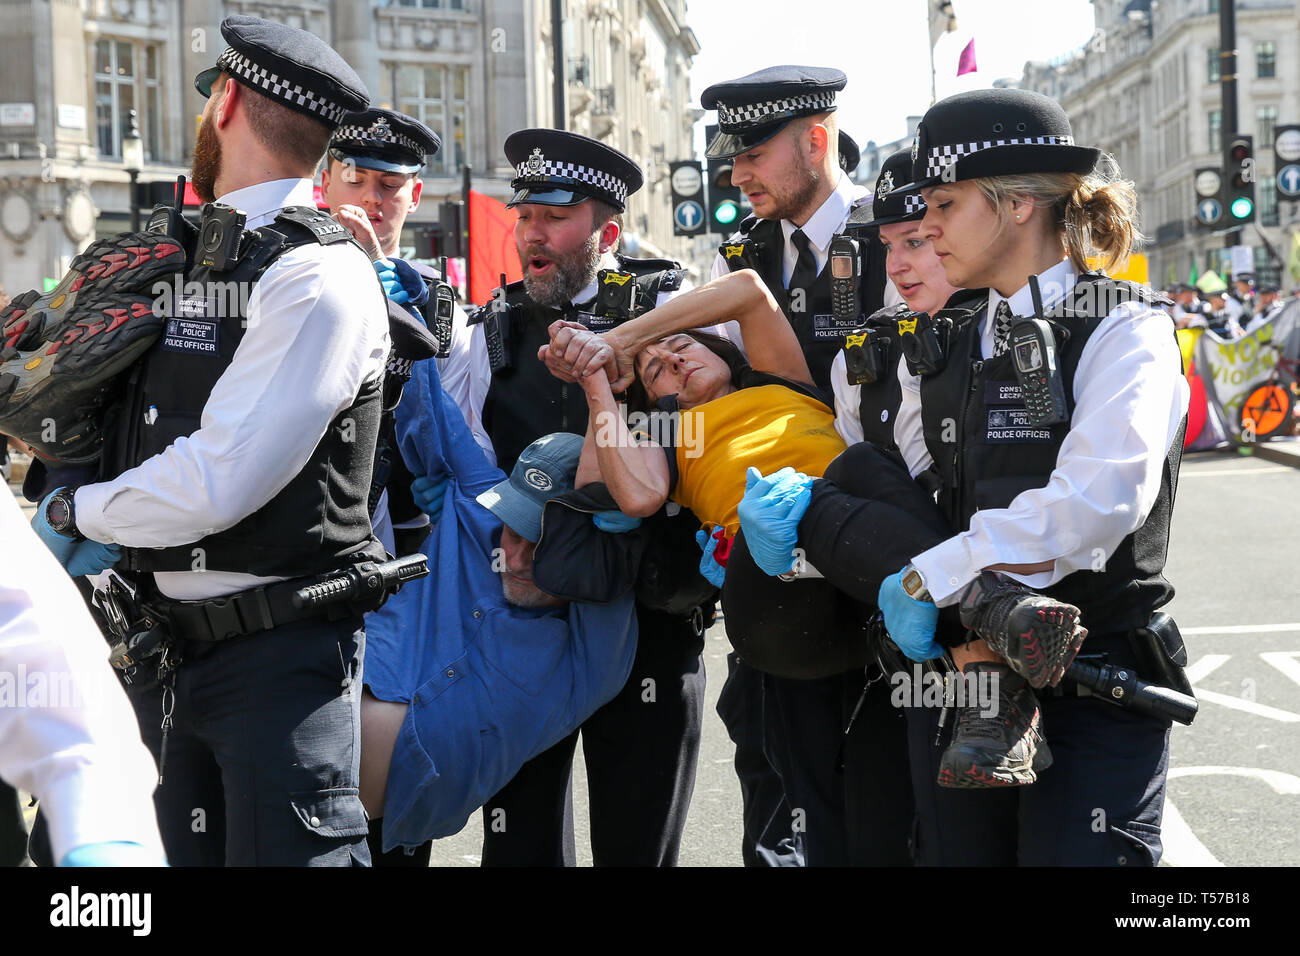 Environmental activists are seen being arrested by the police officers at the Oxford Circus during the fifth day of the climate change protest by the Extinction Rebellion movement group. A large number of police presence around the pink yacht as they un-bond the activists who glued themselves and the police prepares to remove them from the site. According to the Met Police, over 1000 activists have been arrested since the demonstration started on 11 April 2019. Stock Photo